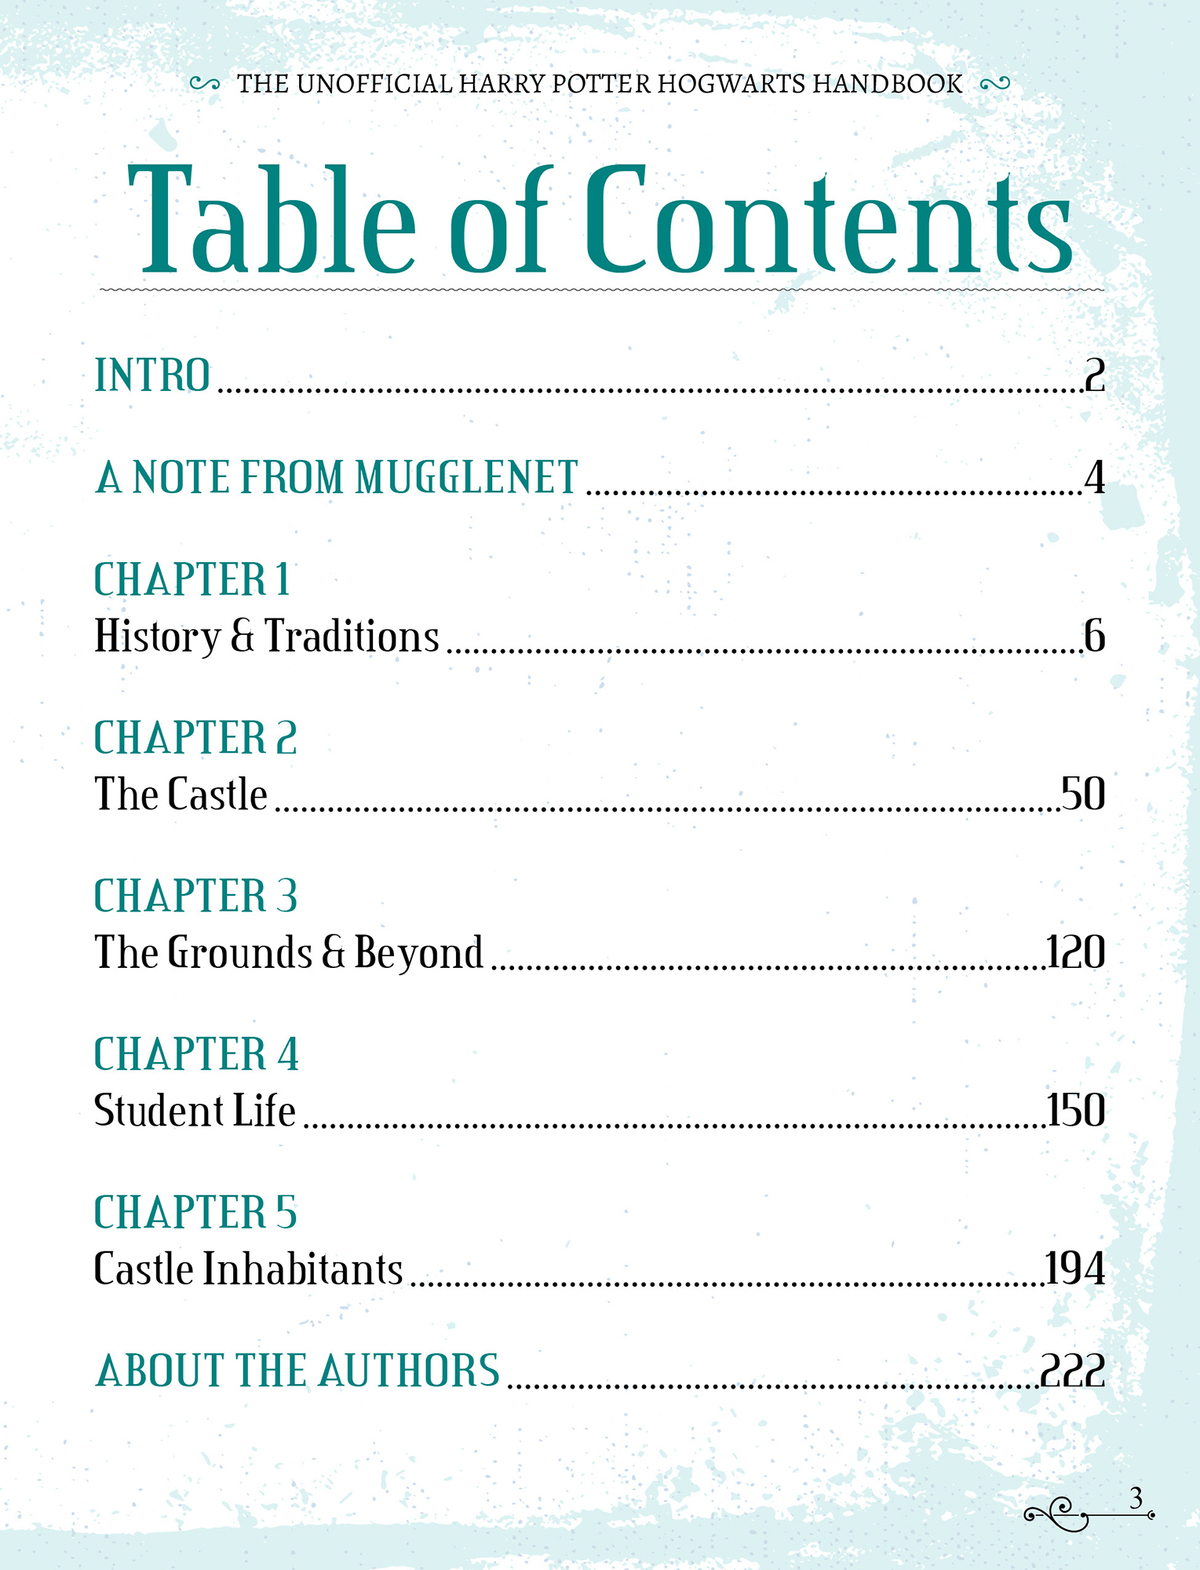 “The Unofficial Harry Potter Hogwarts Handbook” table of contents